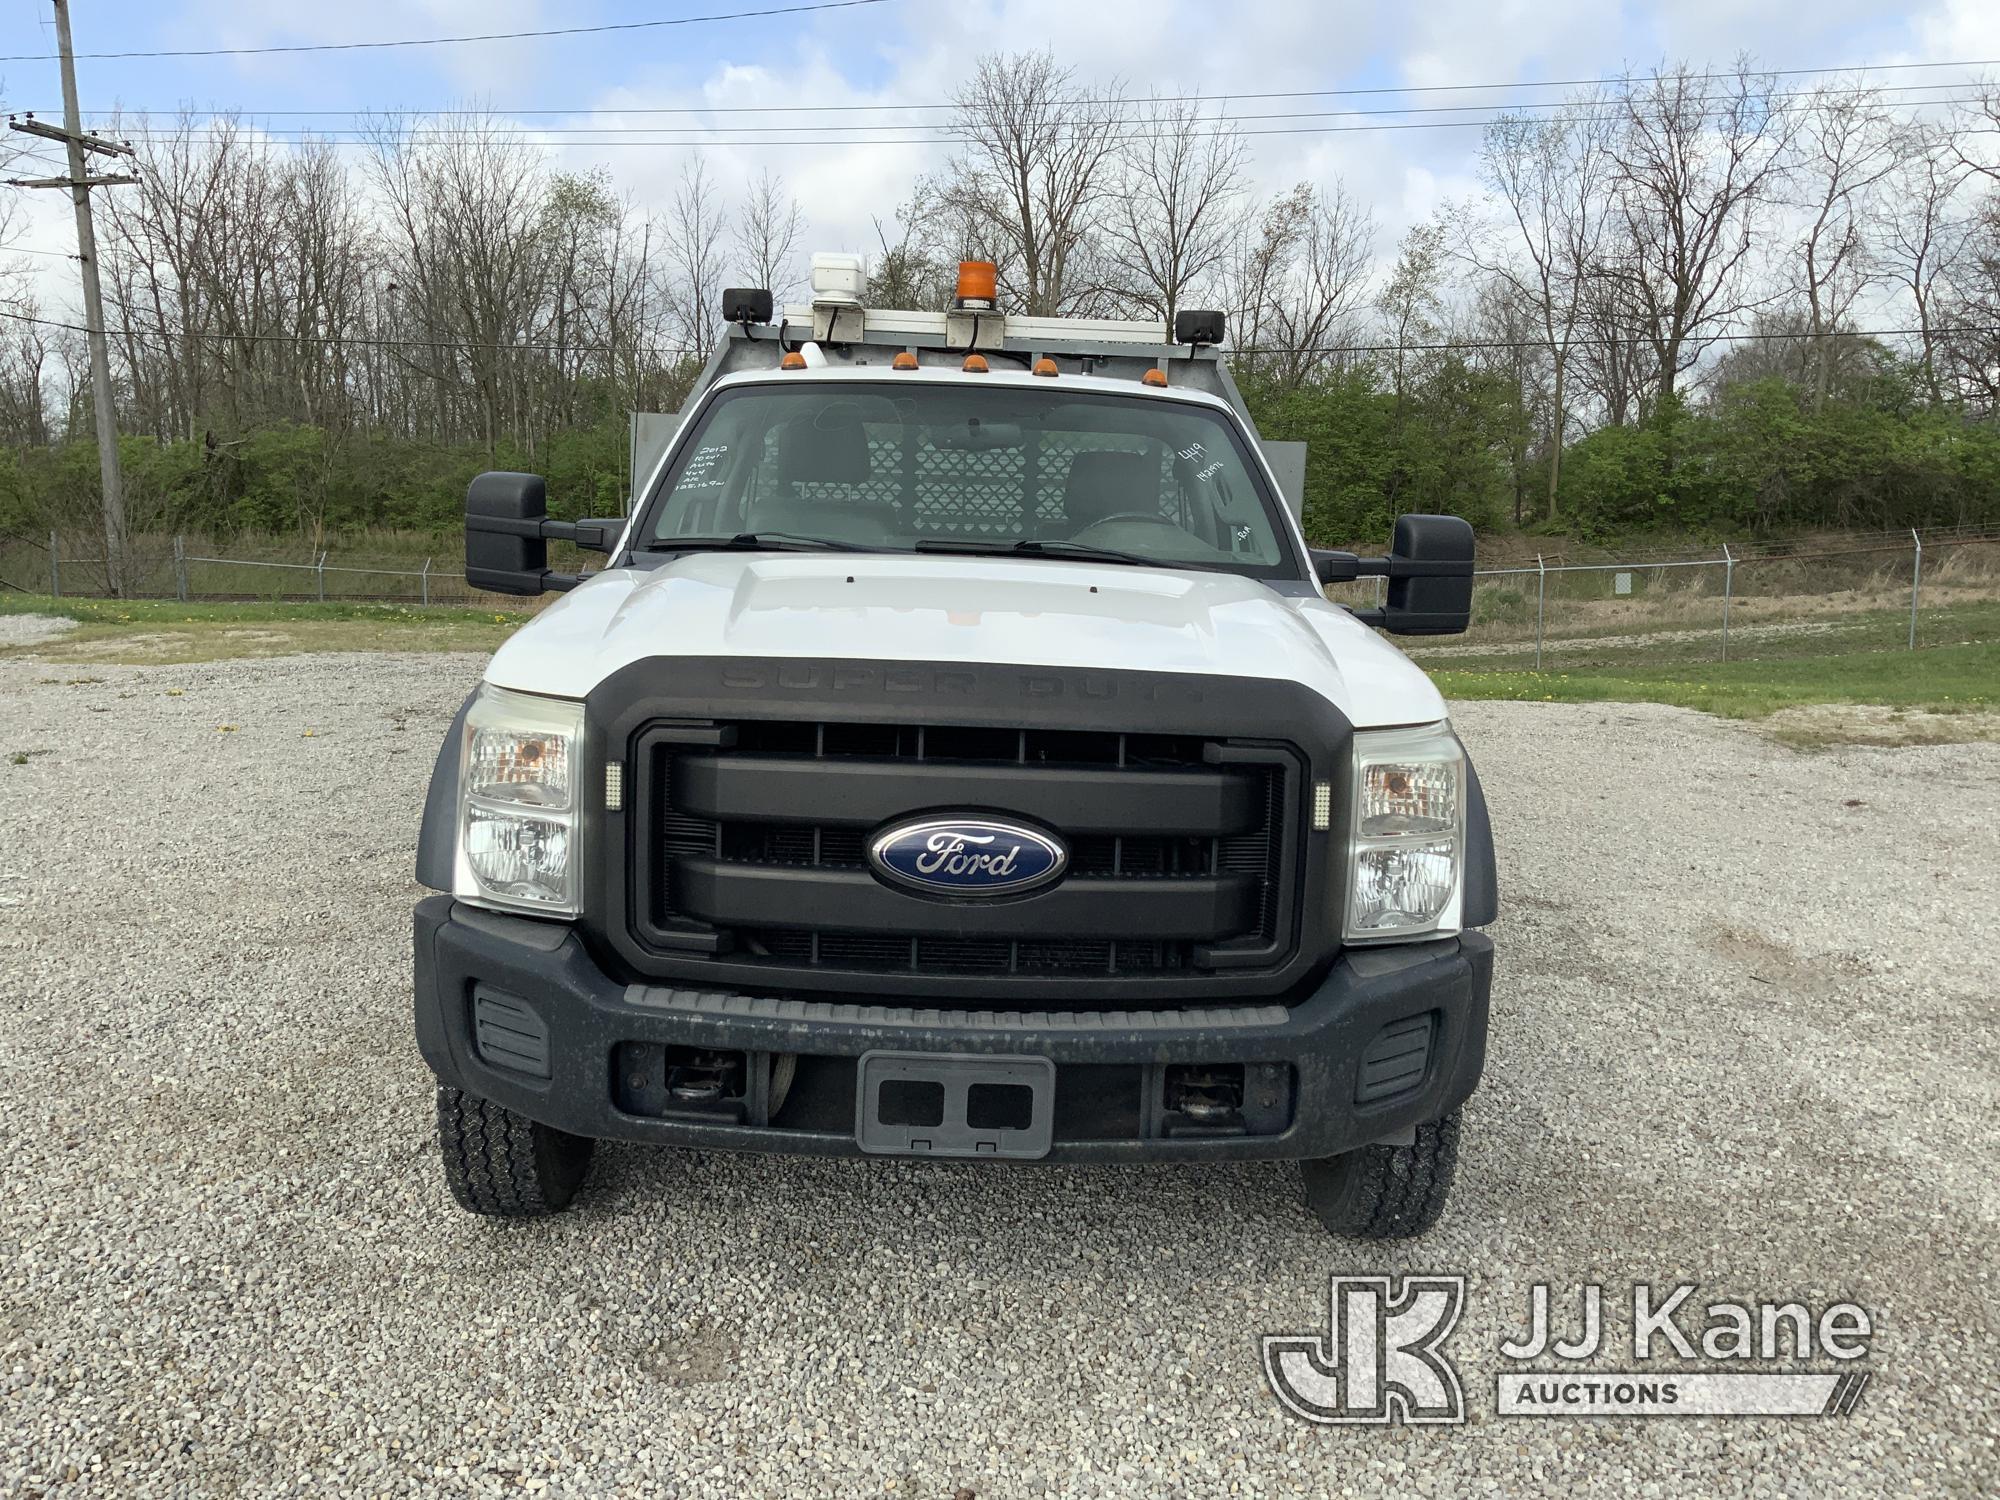 (Fort Wayne, IN) 2012 Ford F450 4x4 Flatbed Truck Runs & Moves